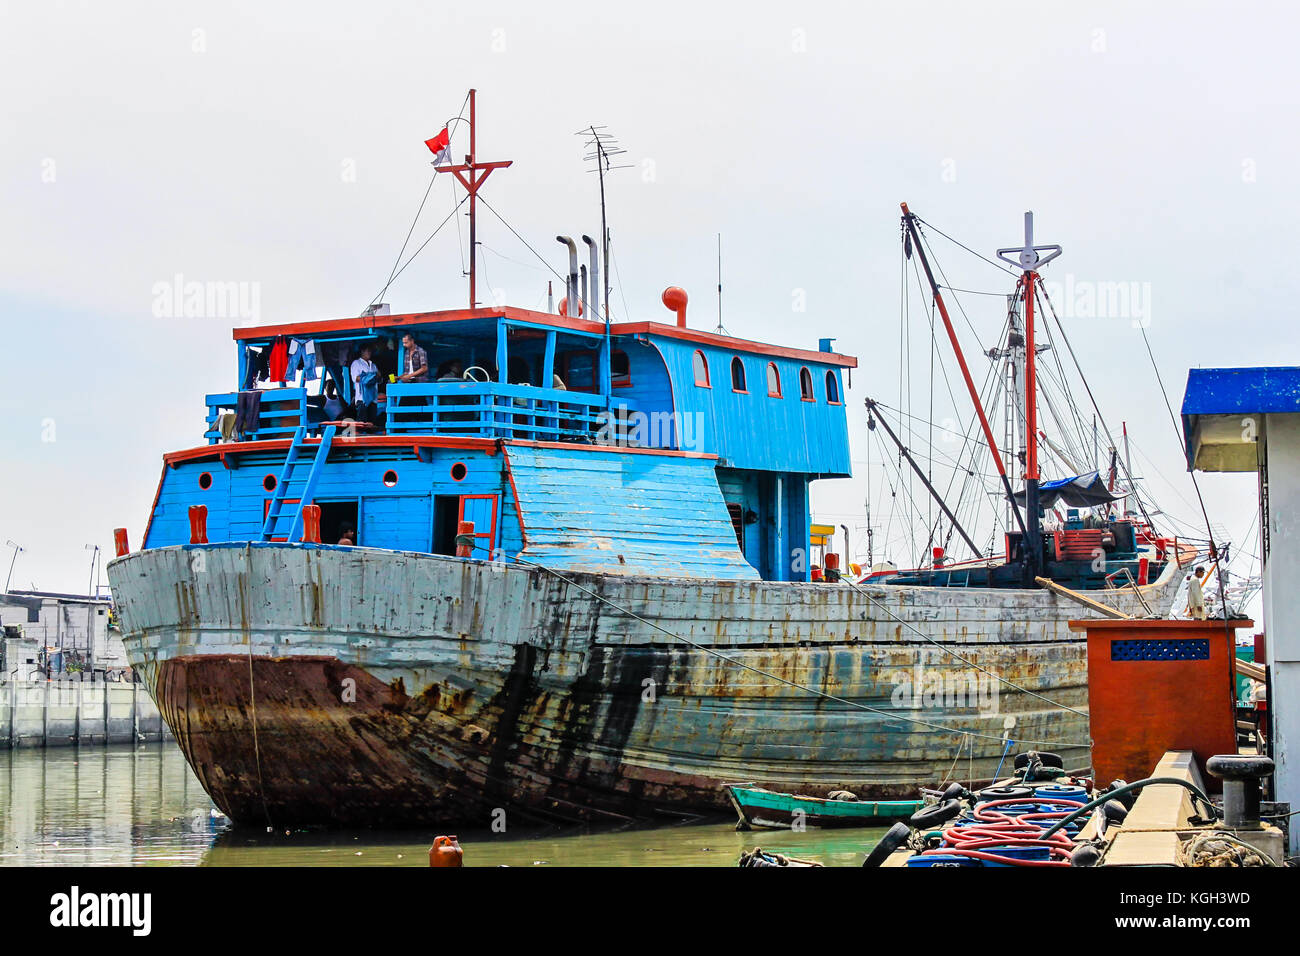 Colorful rusty phinisi ship in harbor with fishermen on board. Sunda Kelapa Harbor, Jakarta, Indonesia. Blue and red colored rusty, old Phinisi ship. Stock Photo